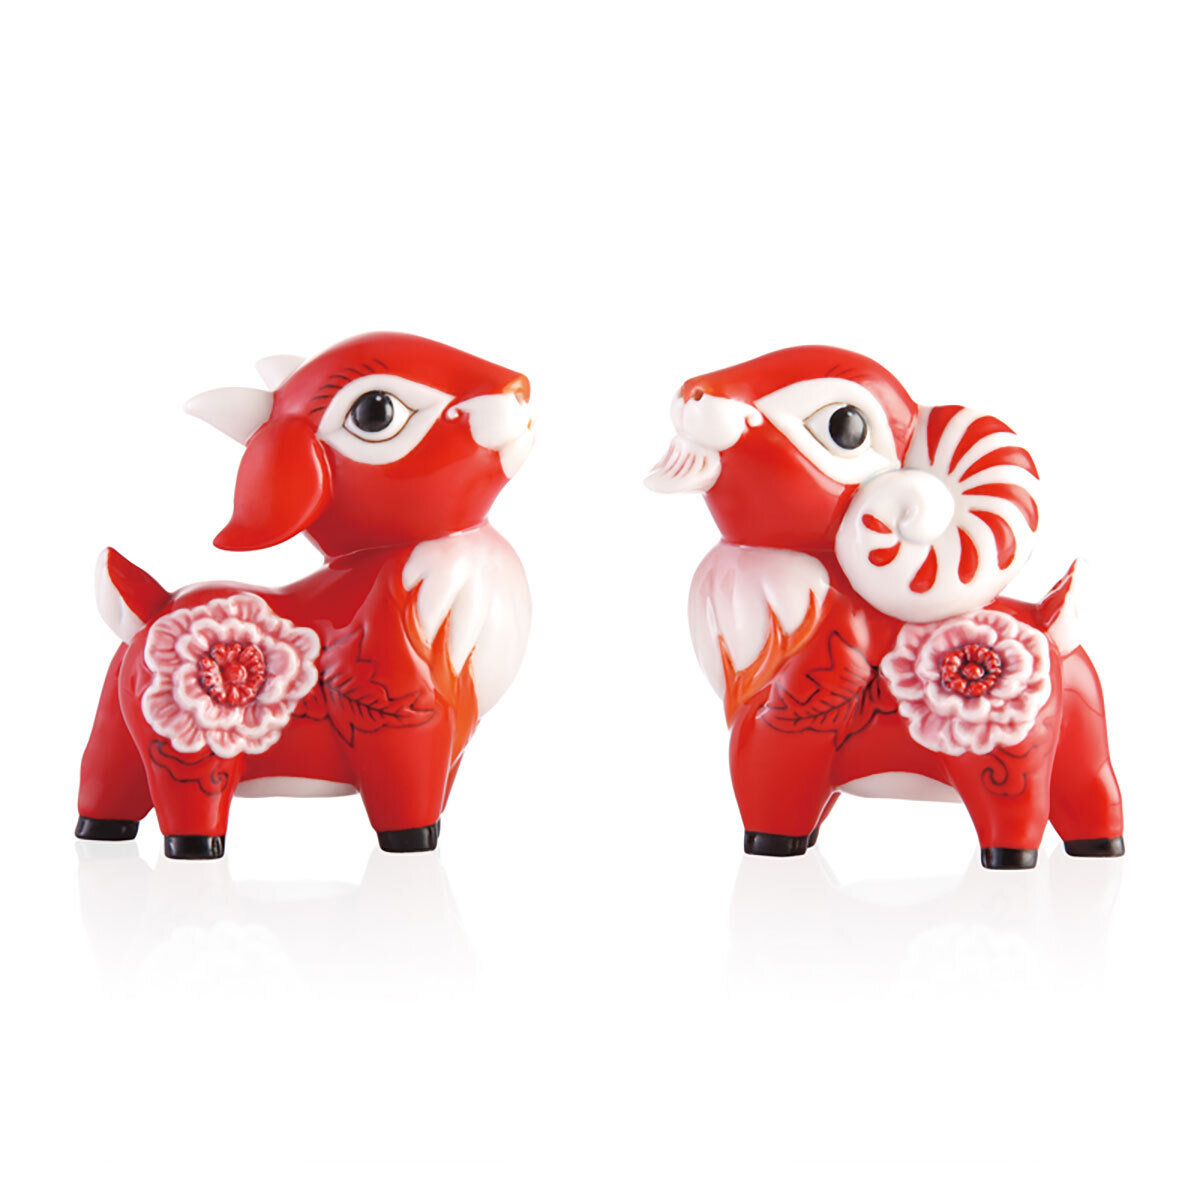 Franz Porcelain Joy and Happiness The Goat Salt and Pepper Shakers FZ03291